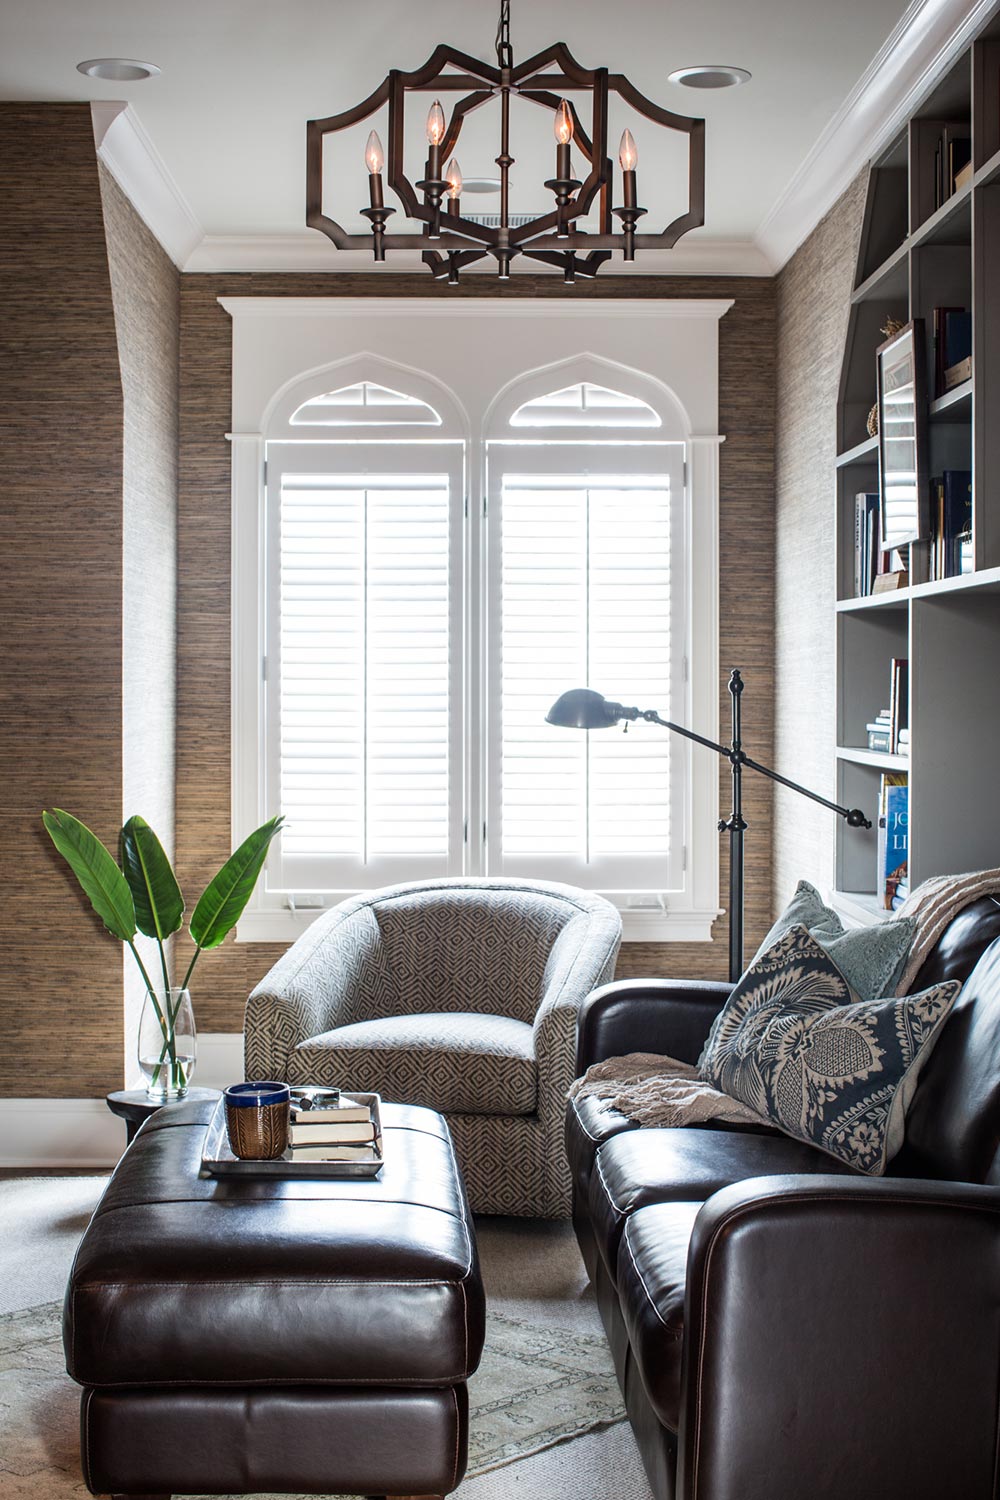 Moody library. Dark grass cloth wallpaper. Chic leather furniture. Library built-ins. Statement chandelier 